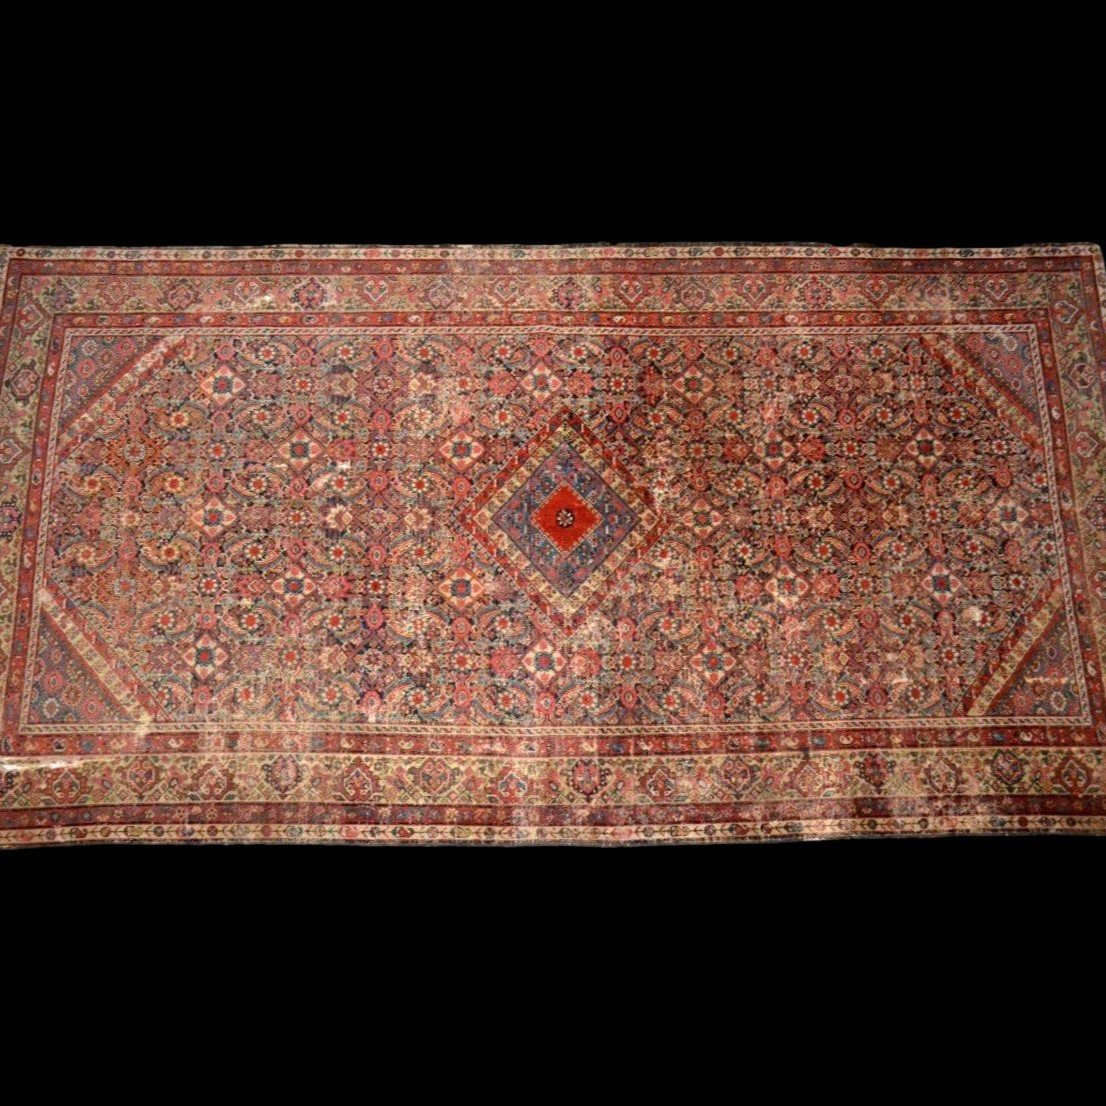 Old Ferahan Rug, 152 X 295 Cm, Hand-knotted Wool In Persia, Late 18th Century, Kadjar-photo-3